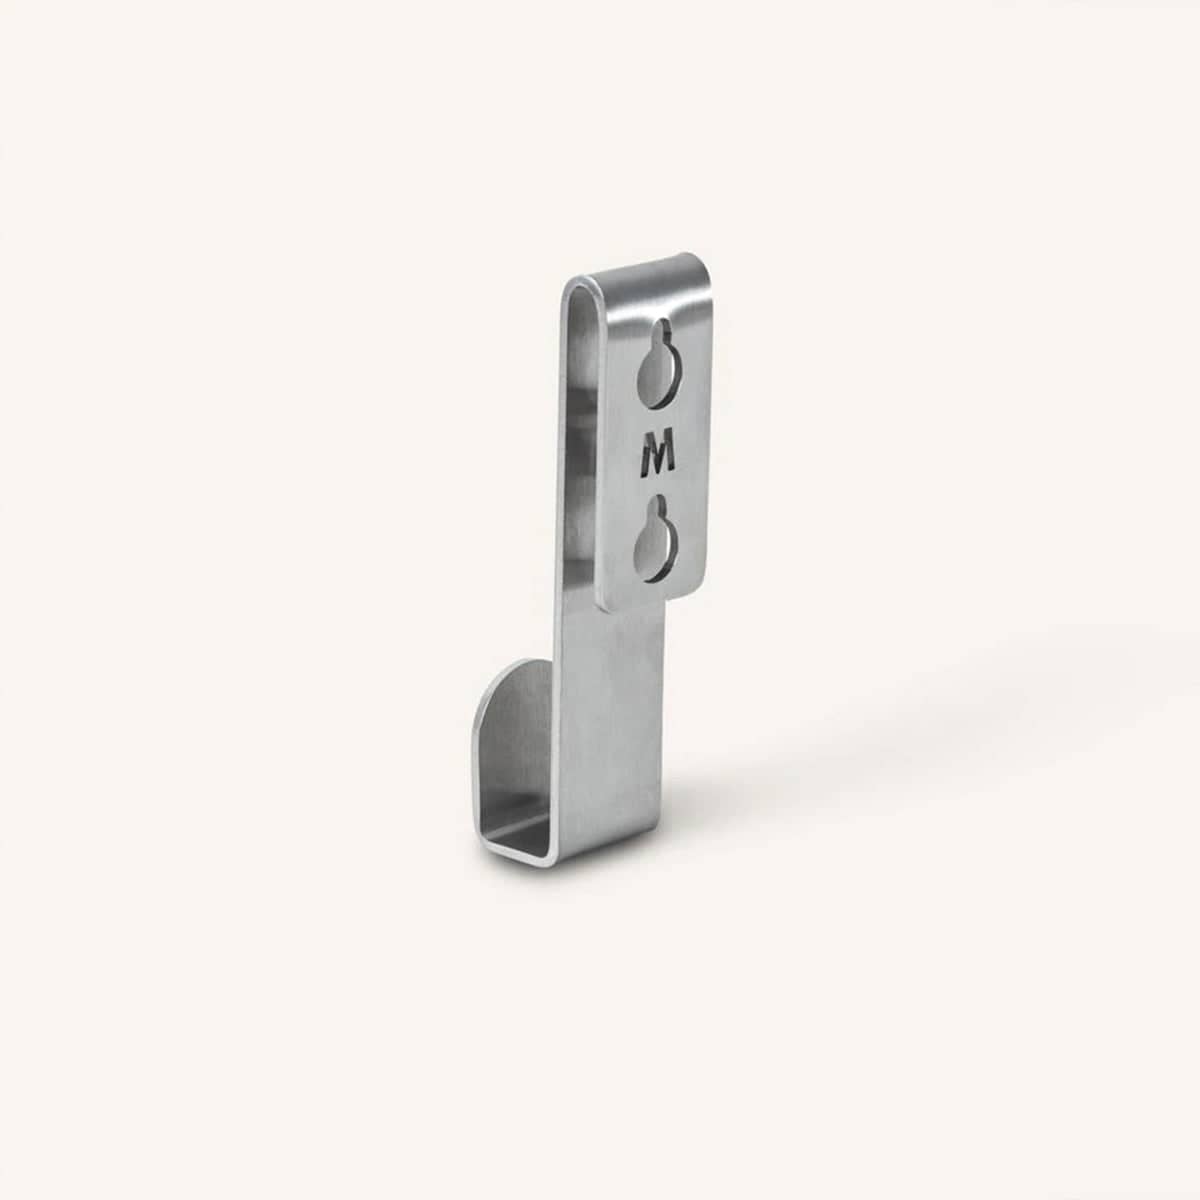 Fold Wall Hook - Stainless